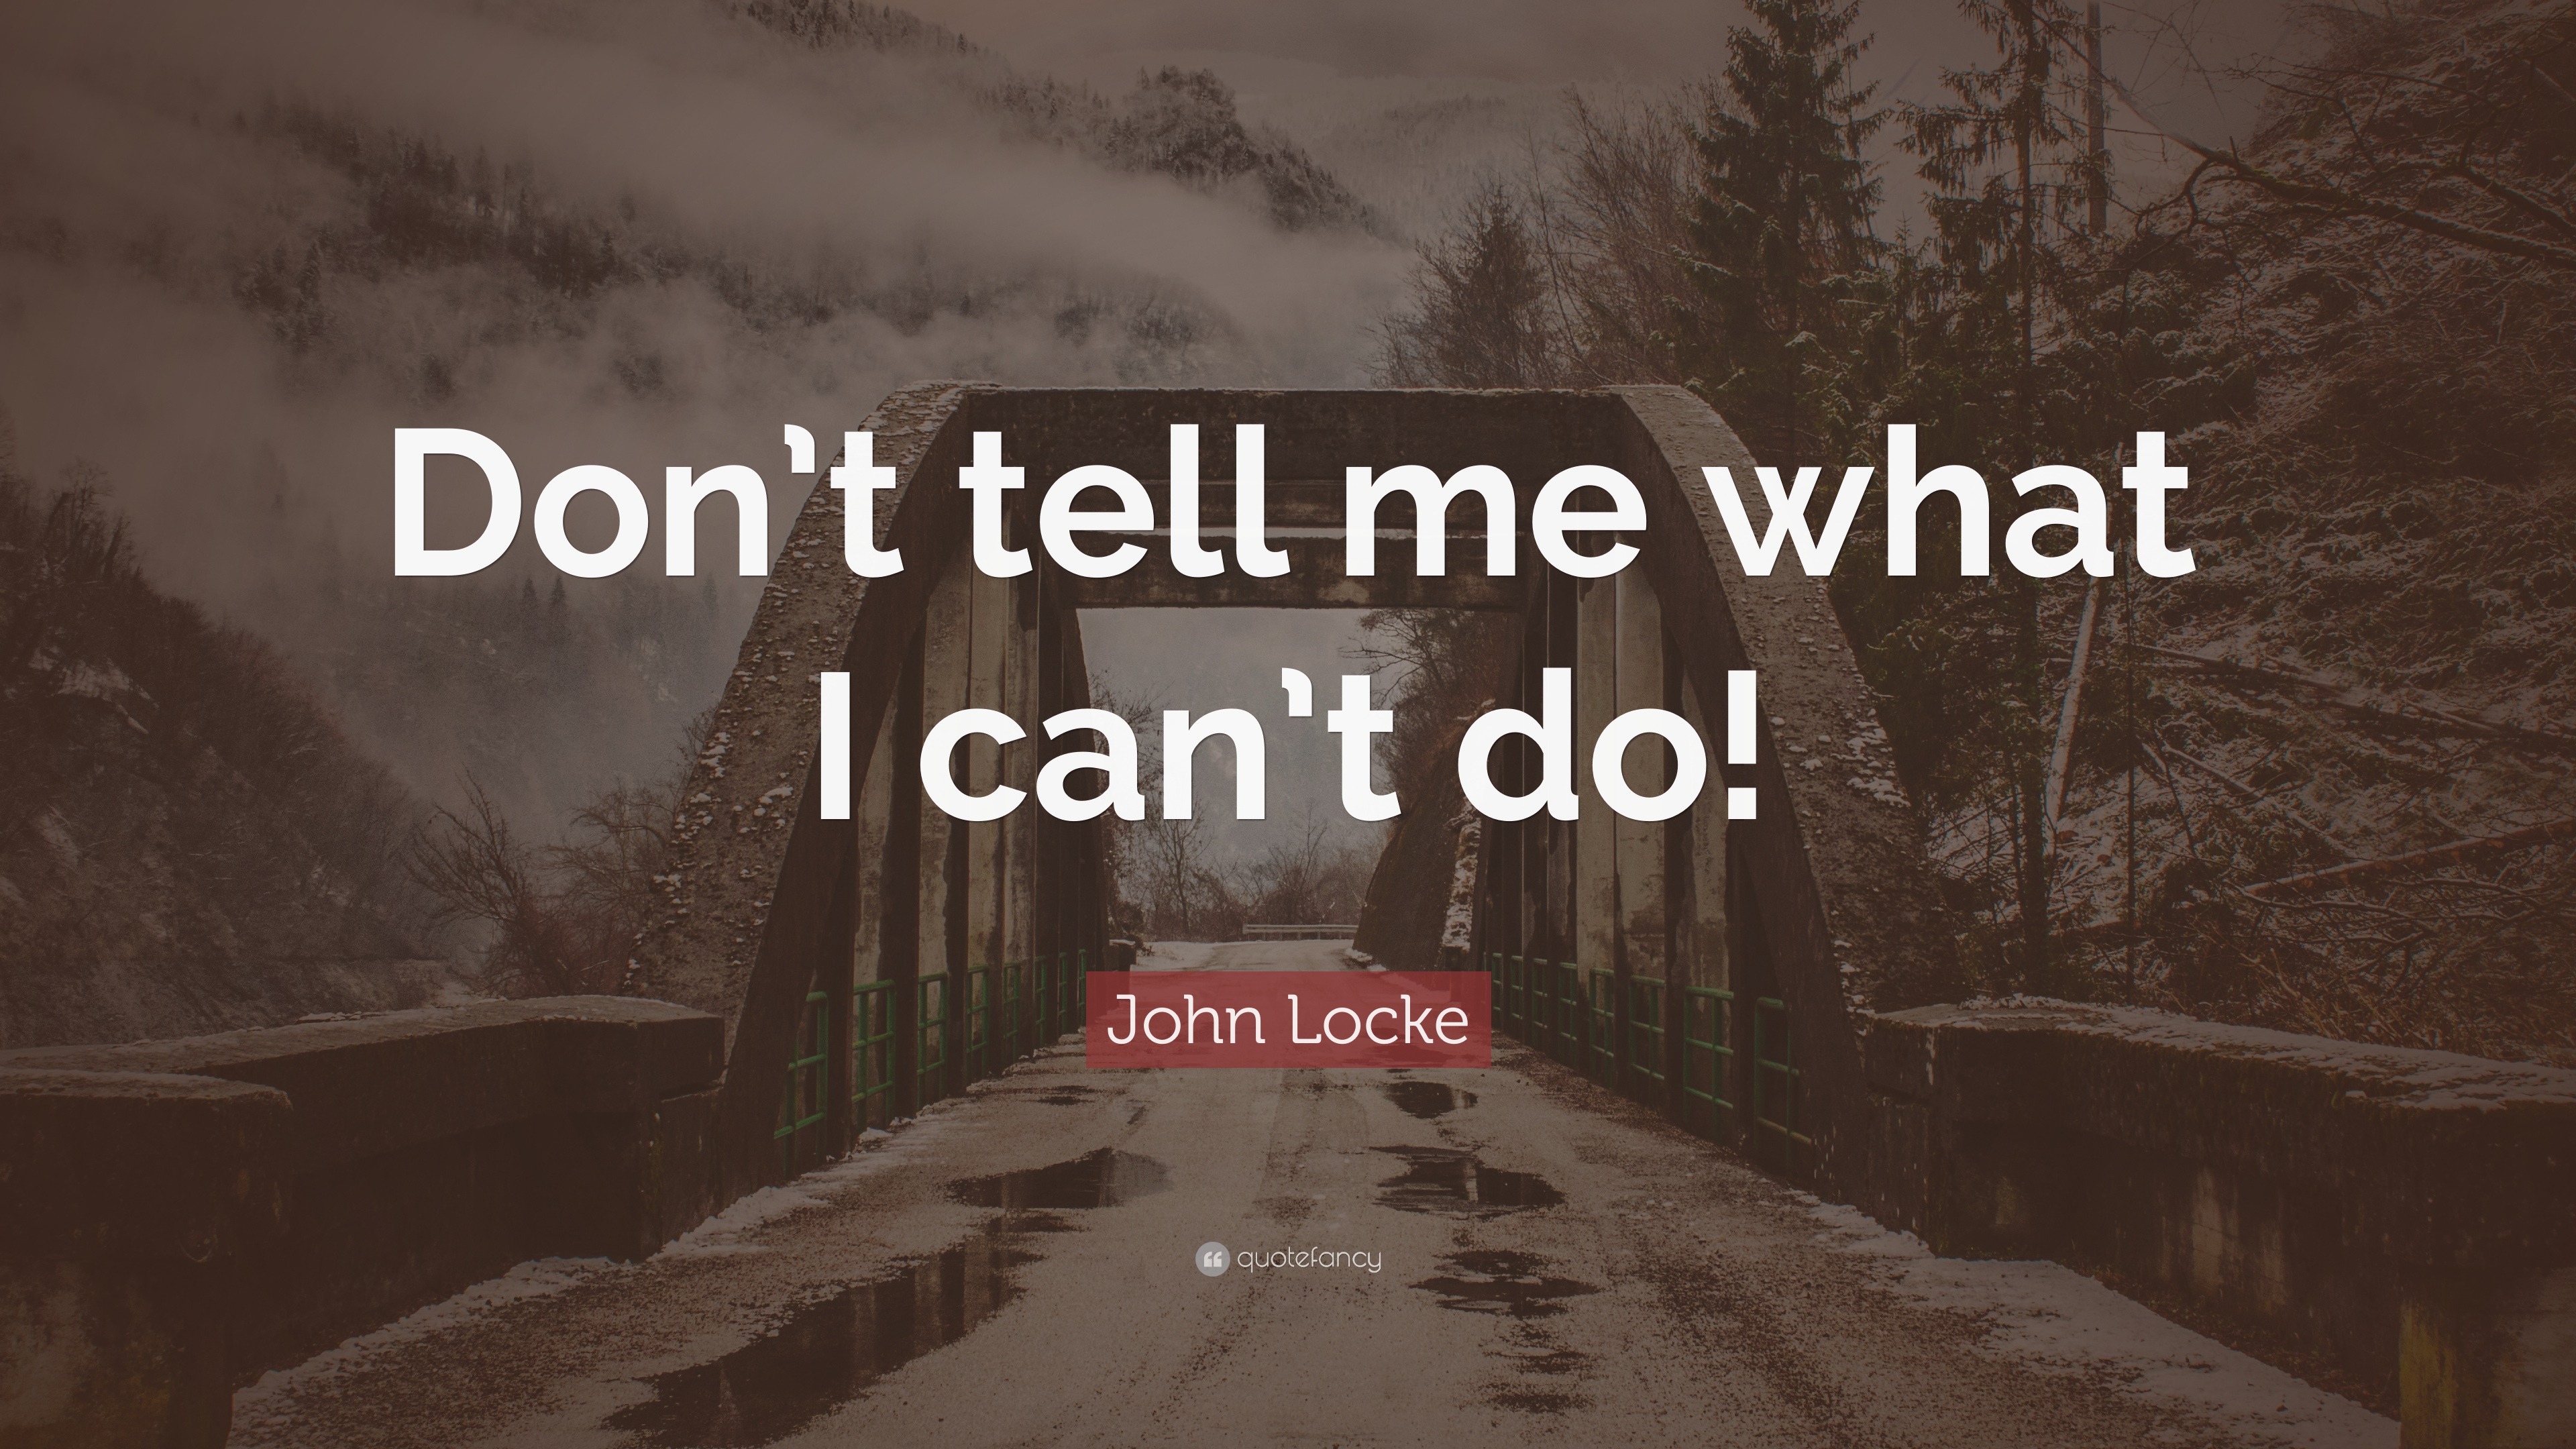 Don T Tell Me What To Do John Locke Quote: “Don’t tell me what I can’t do!”